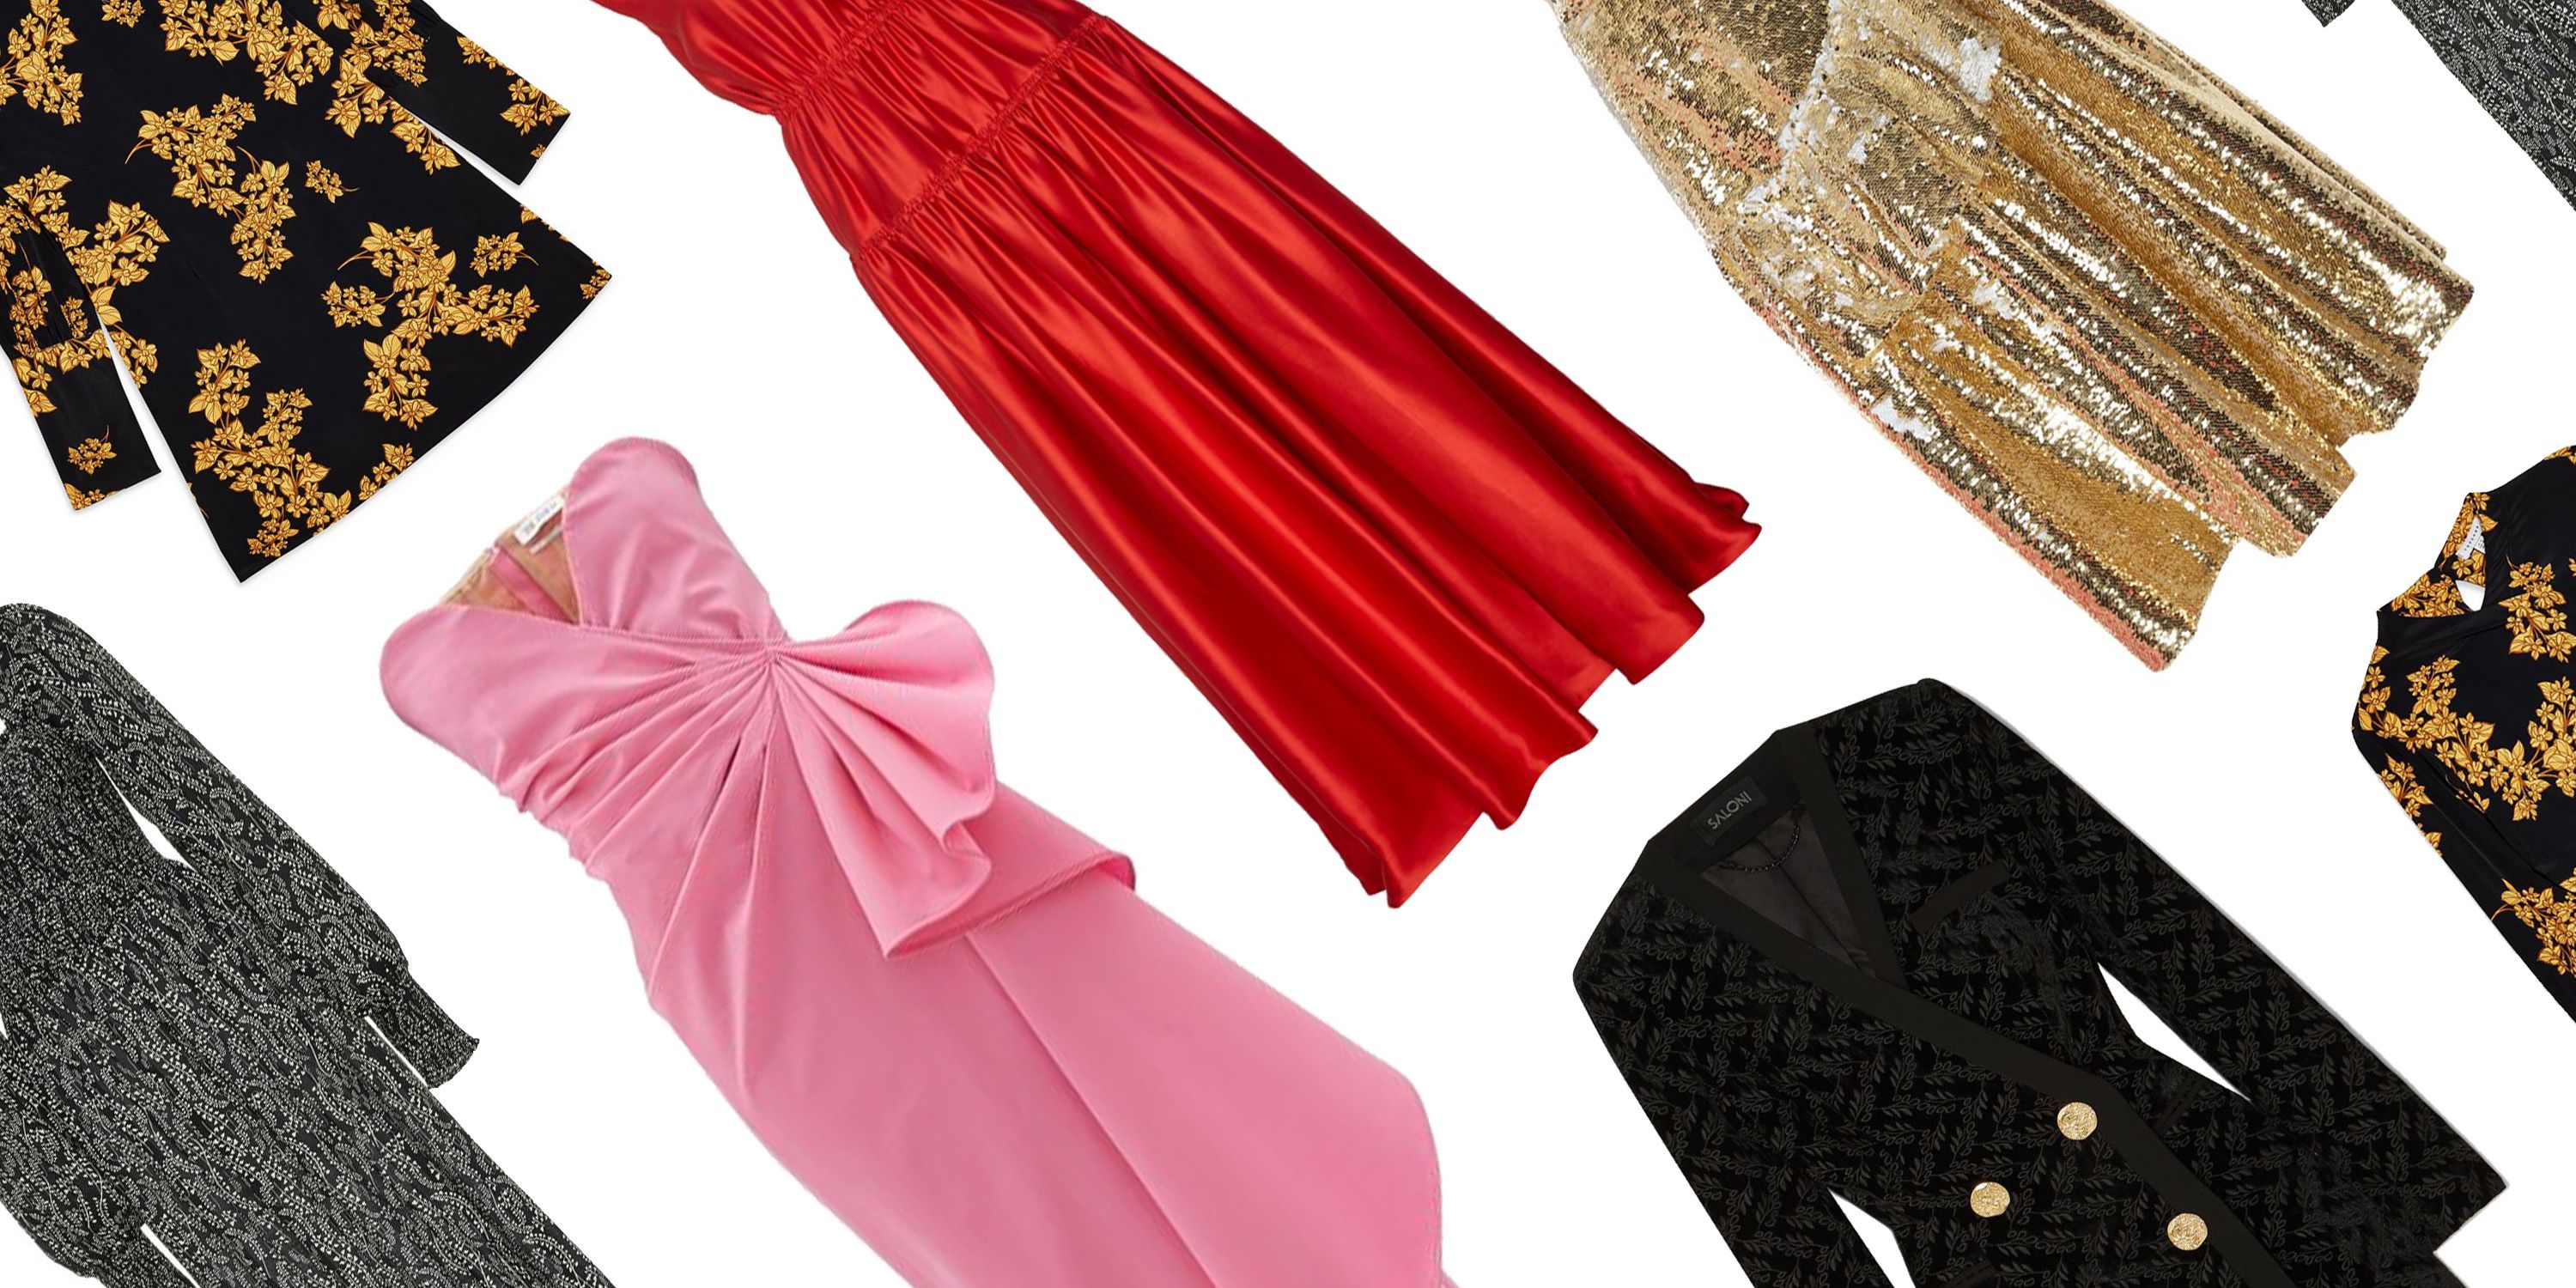 dresses for new year’s eve